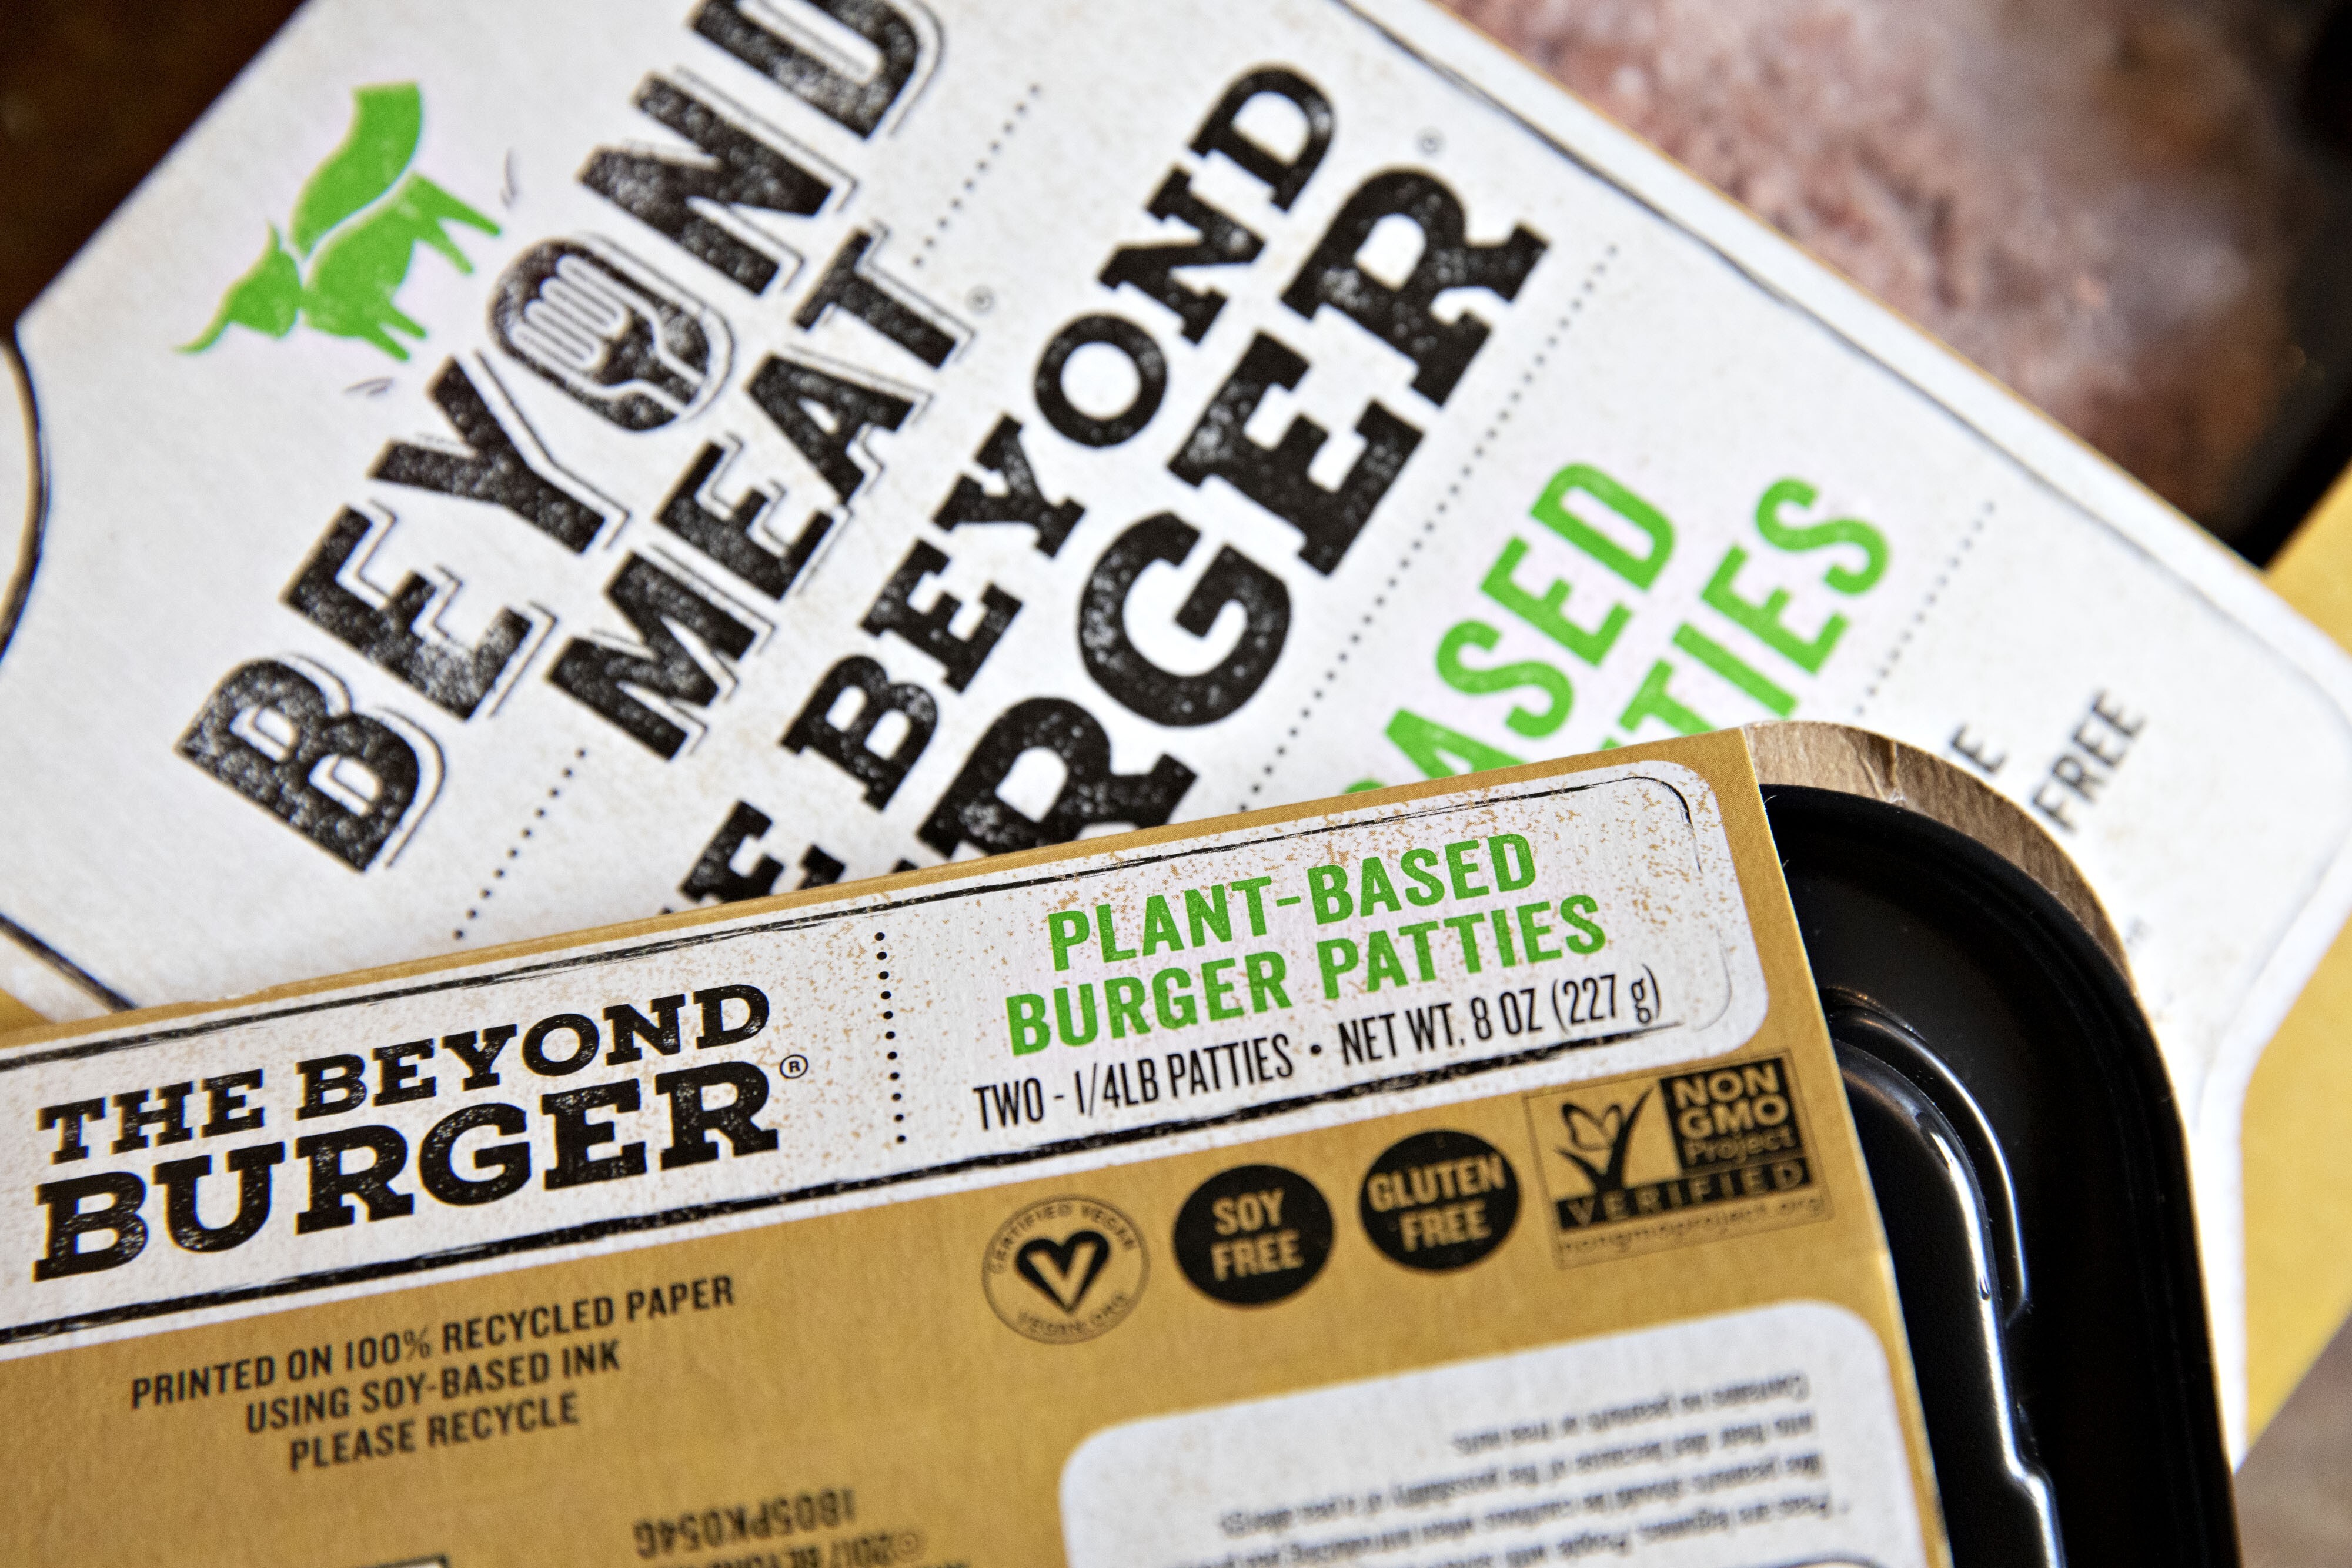 Packages of Beyond Meat plant-based burger patties are displayed for a photograph in Illinois, US, on Tuesday, April 23, 2019. Photo: Bloomberg